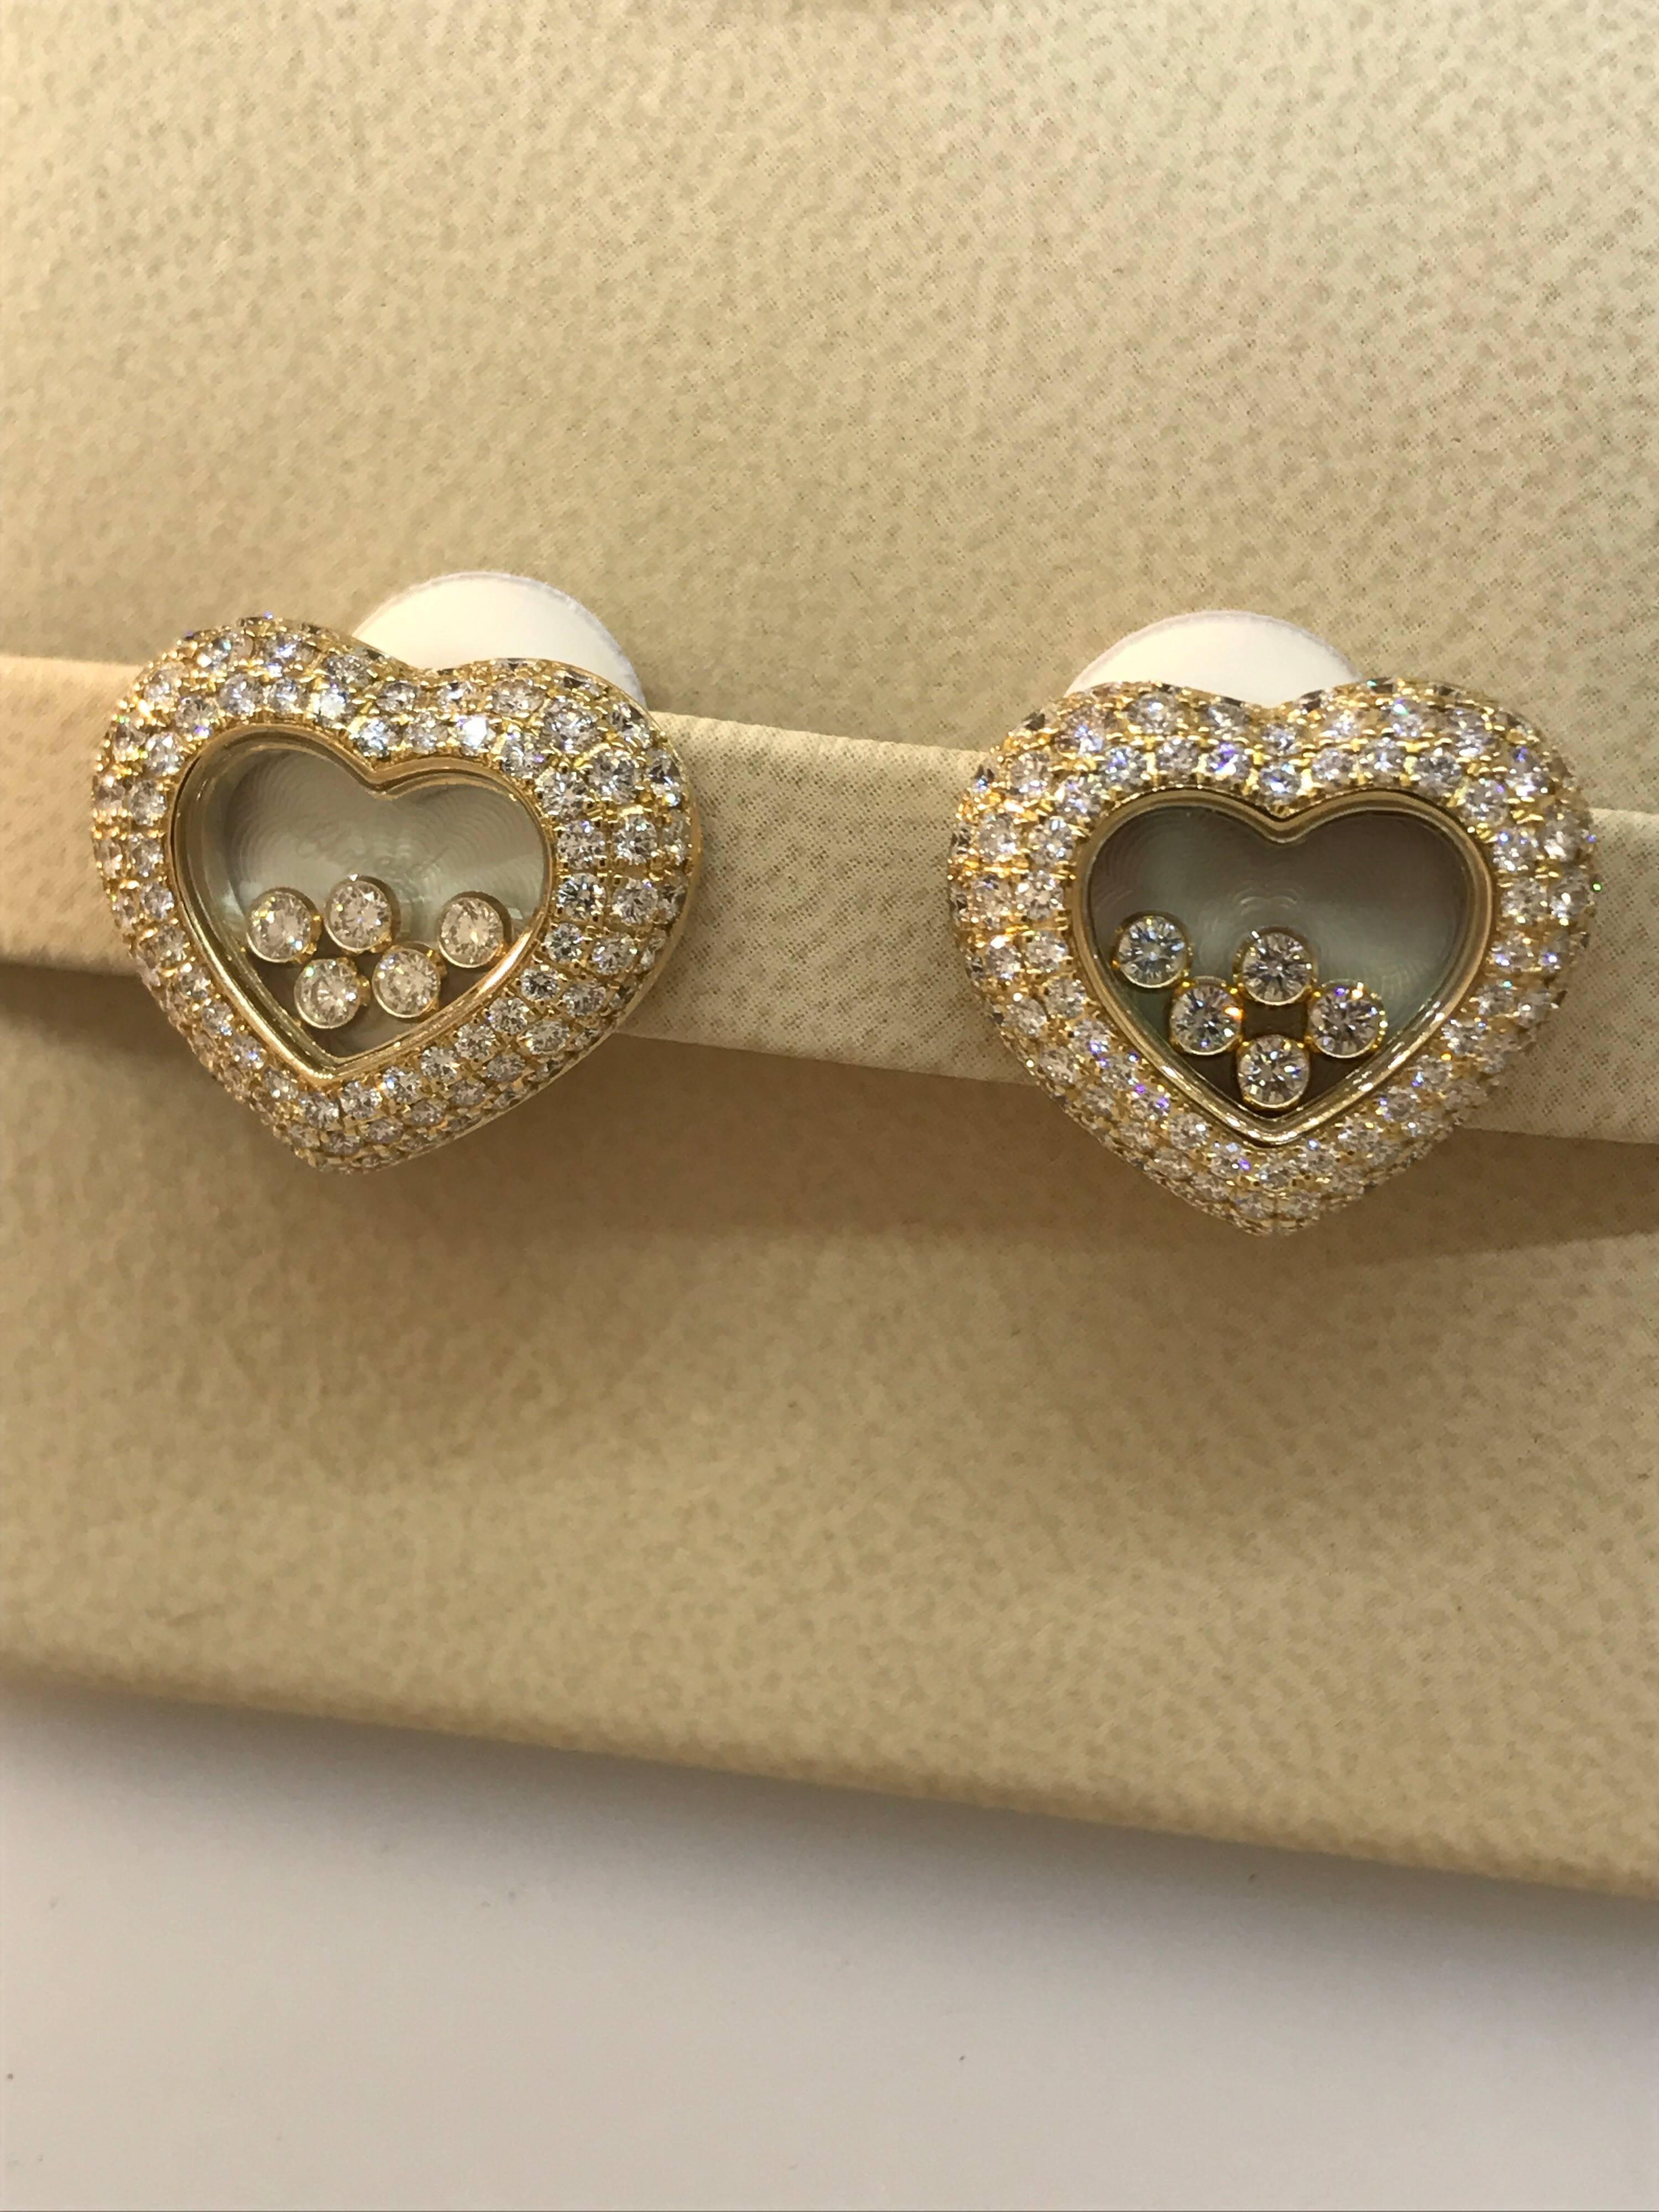 Chopard Happy Diamonds Large Hearts Earrings

Model Number: 84/6602-20 (also known as 84/6602-0001)

100% Authentic

Brand New

Comes with original Chopard box, certificate of authenticity and warranty and jewels manual

18 Karat Yellow Gold